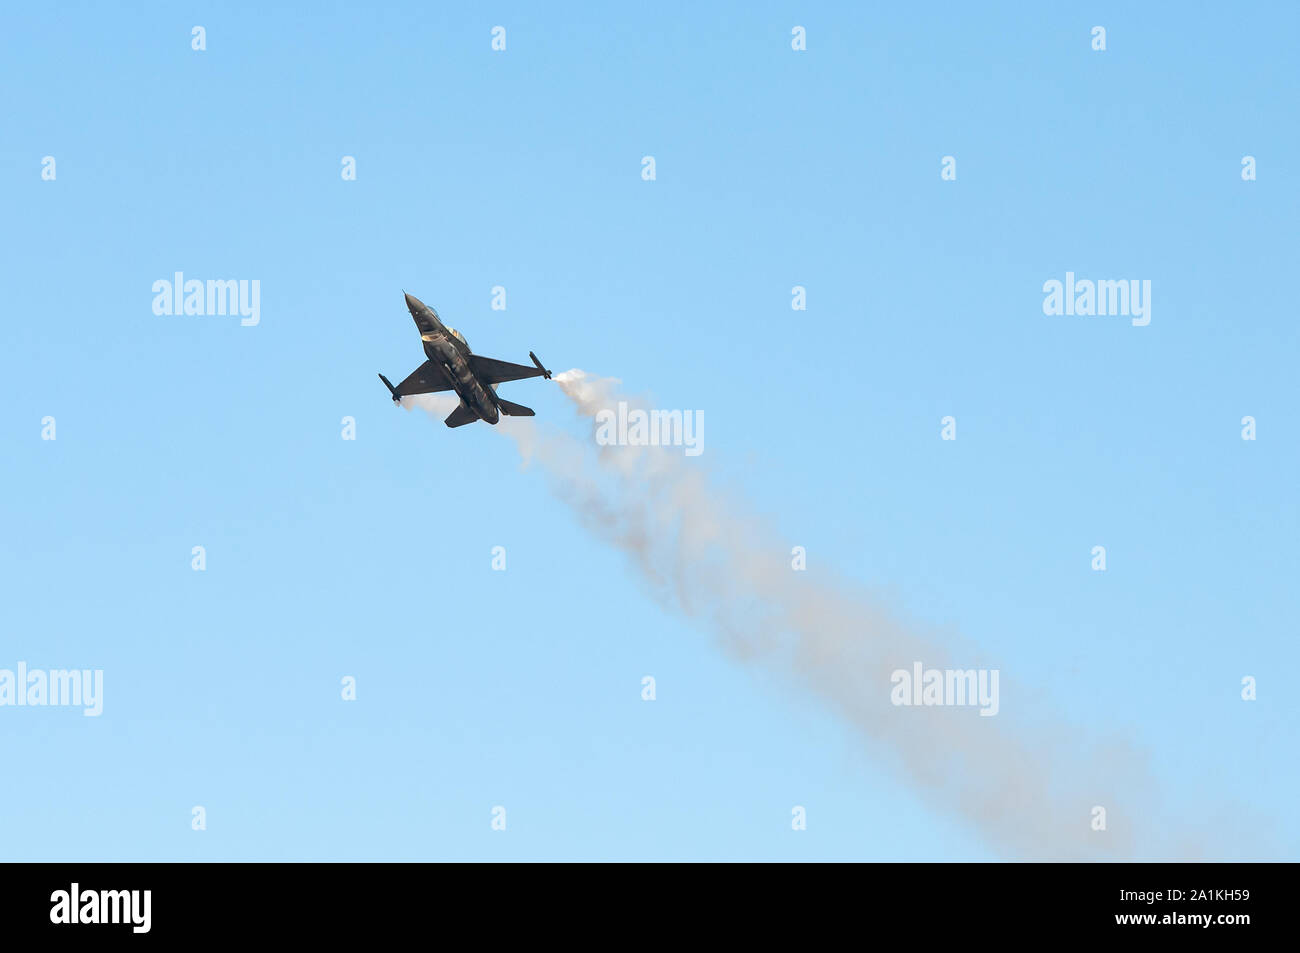 Athens Greece, September 21 2019: Hellenic F-16 demo air fighter plane performing aerobatics on the air during the Athens Flying week 2019 at Tanagra Stock Photo